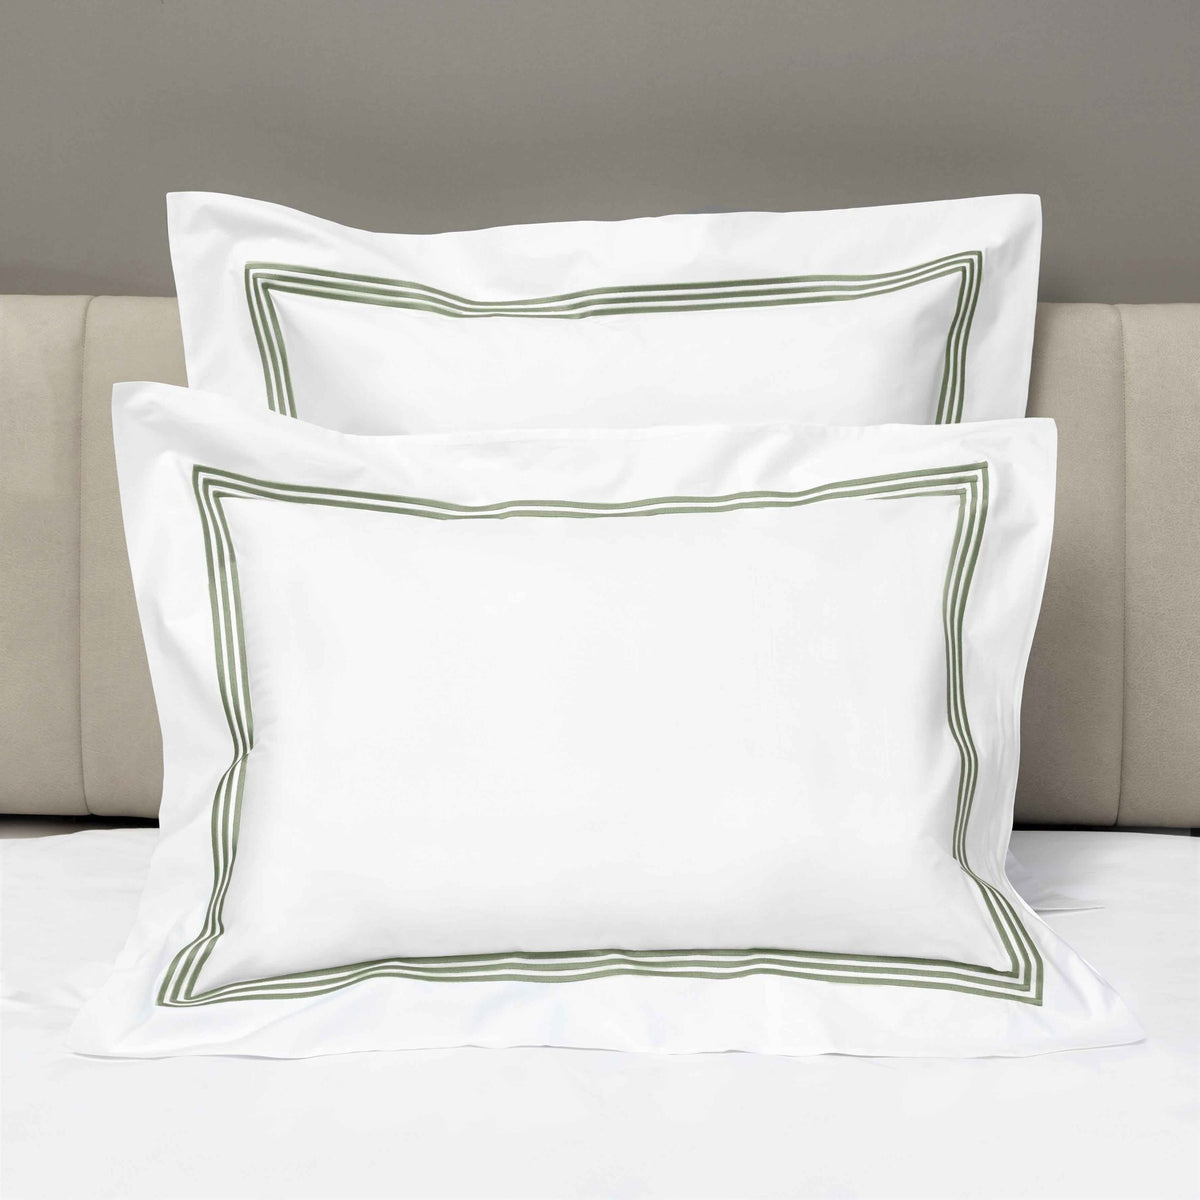 Shams of Signoria Platinum Percale Bedding in White/Olive Green Color